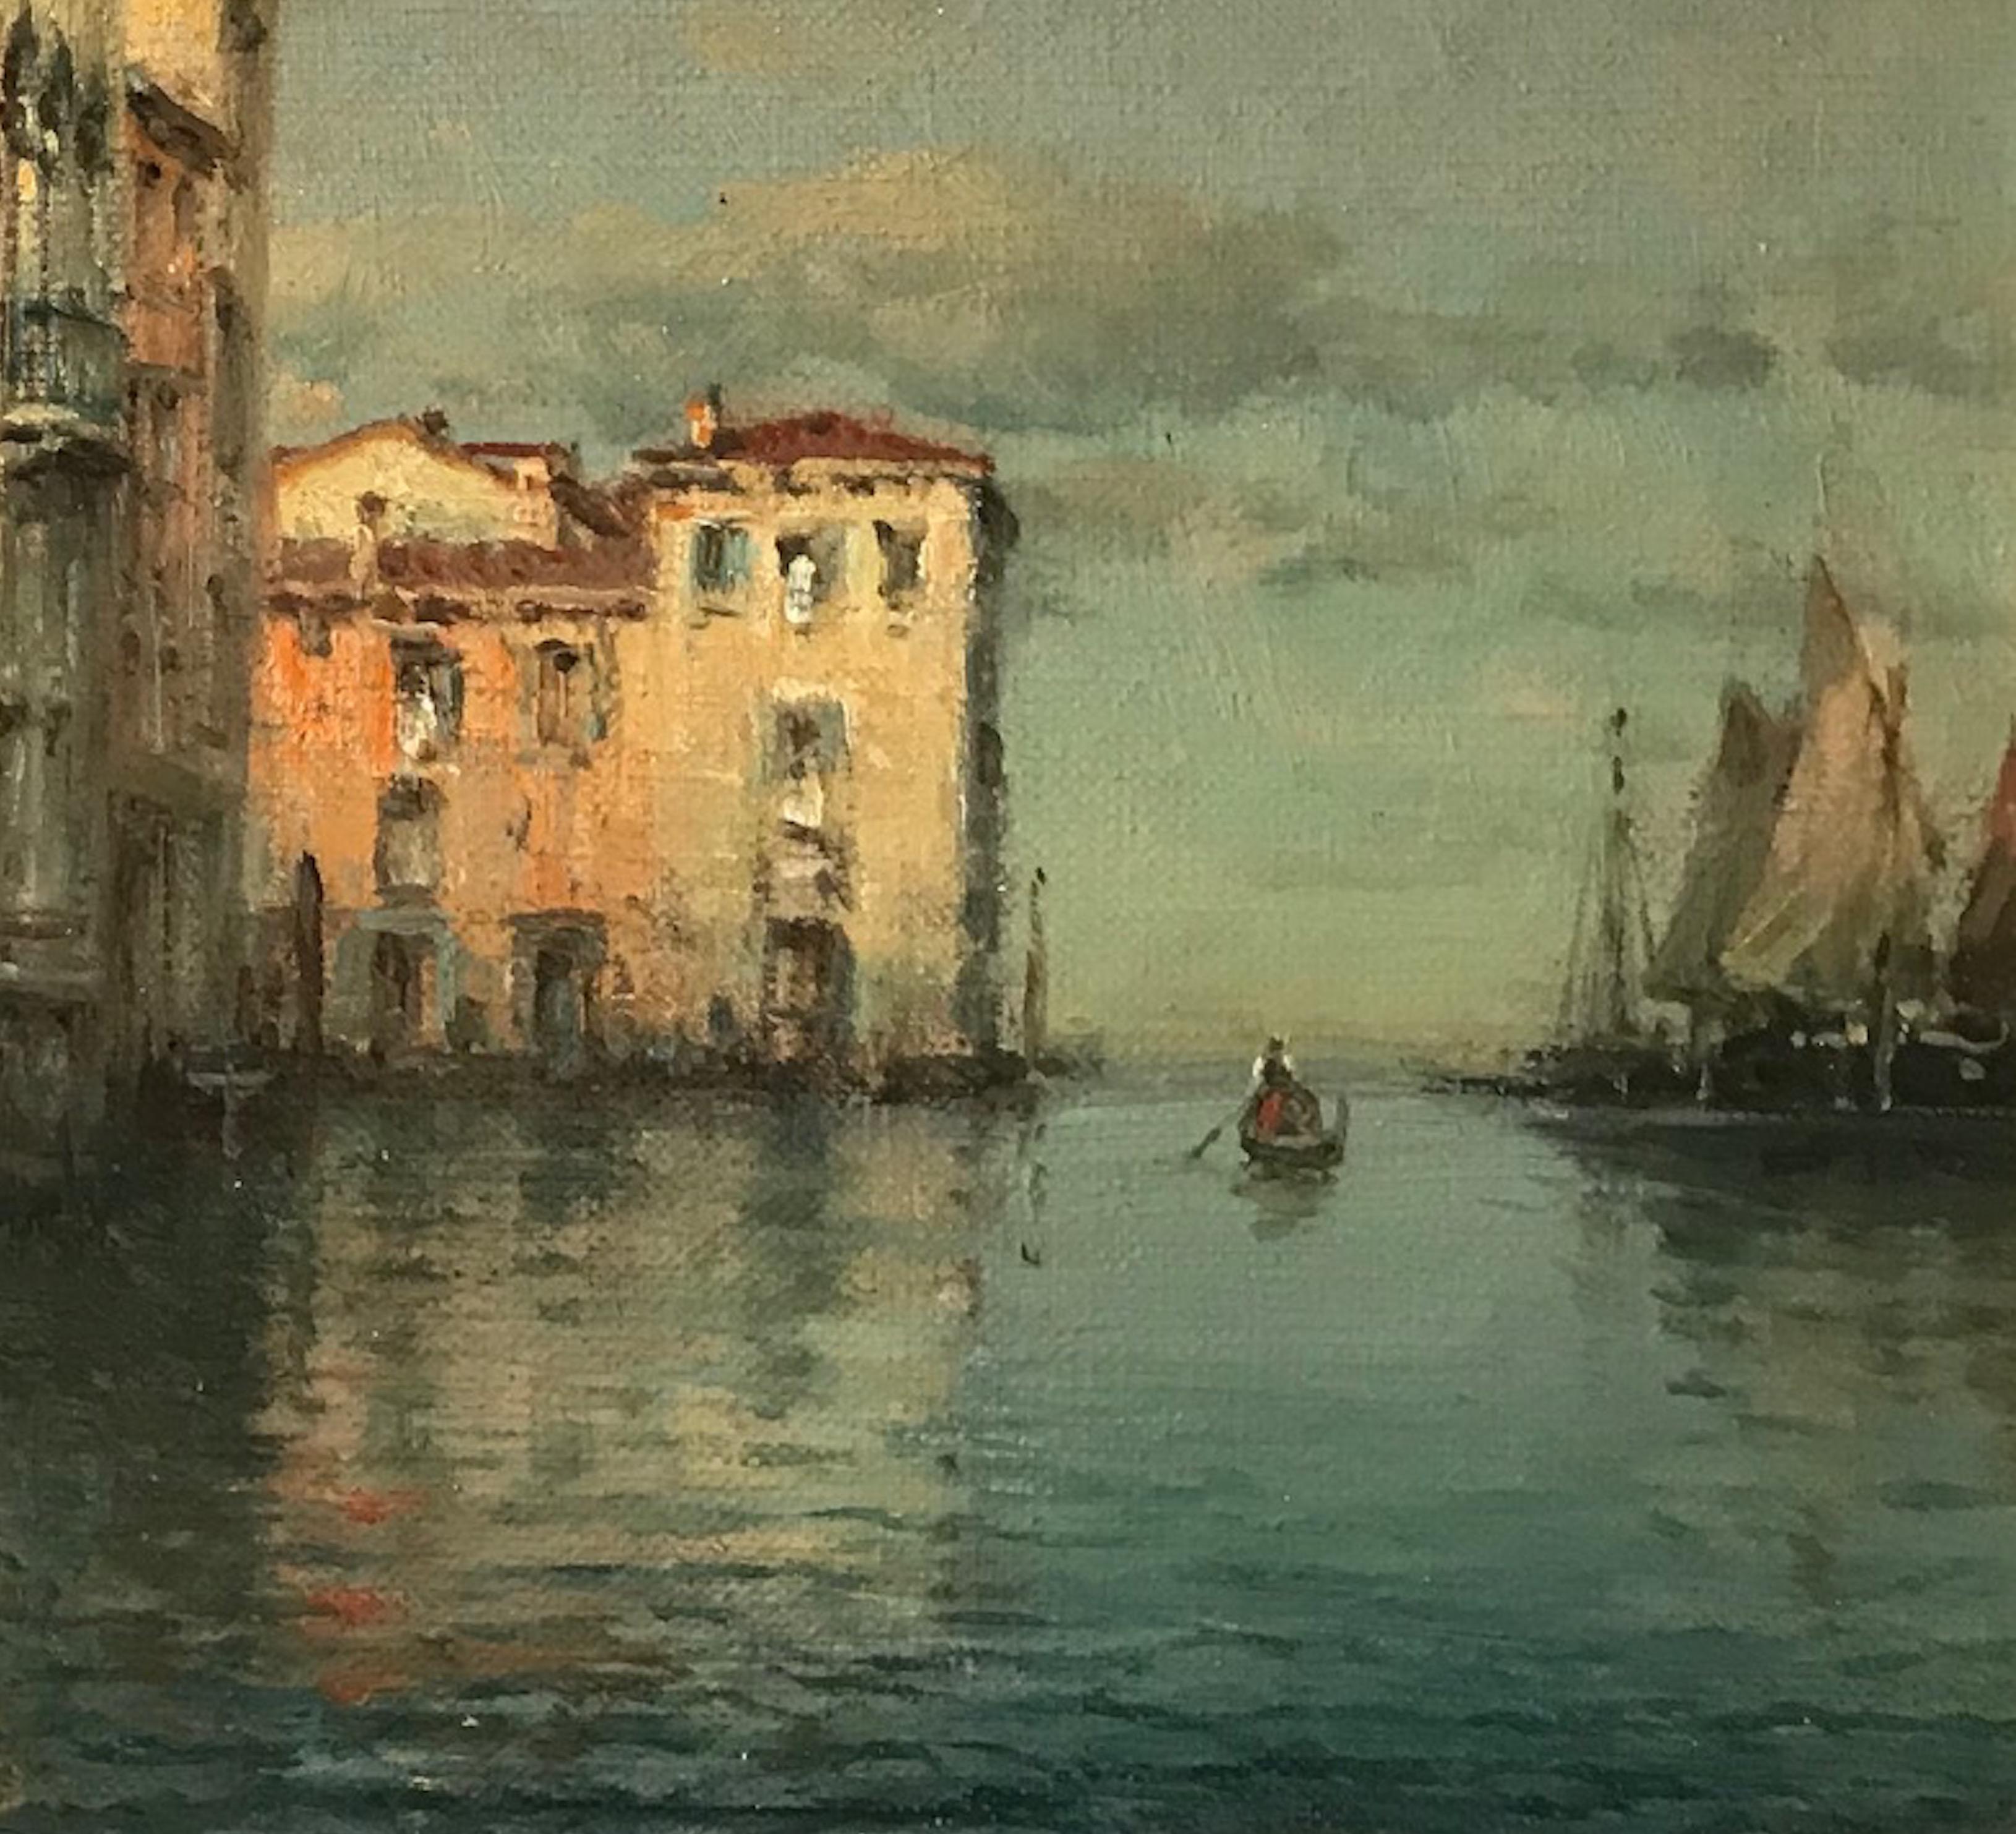 Landscape painting of Venice by Antoine Bouvard Senior Still Waters' - Old Masters Painting by Antoine Bouvard (Marc Aldine)